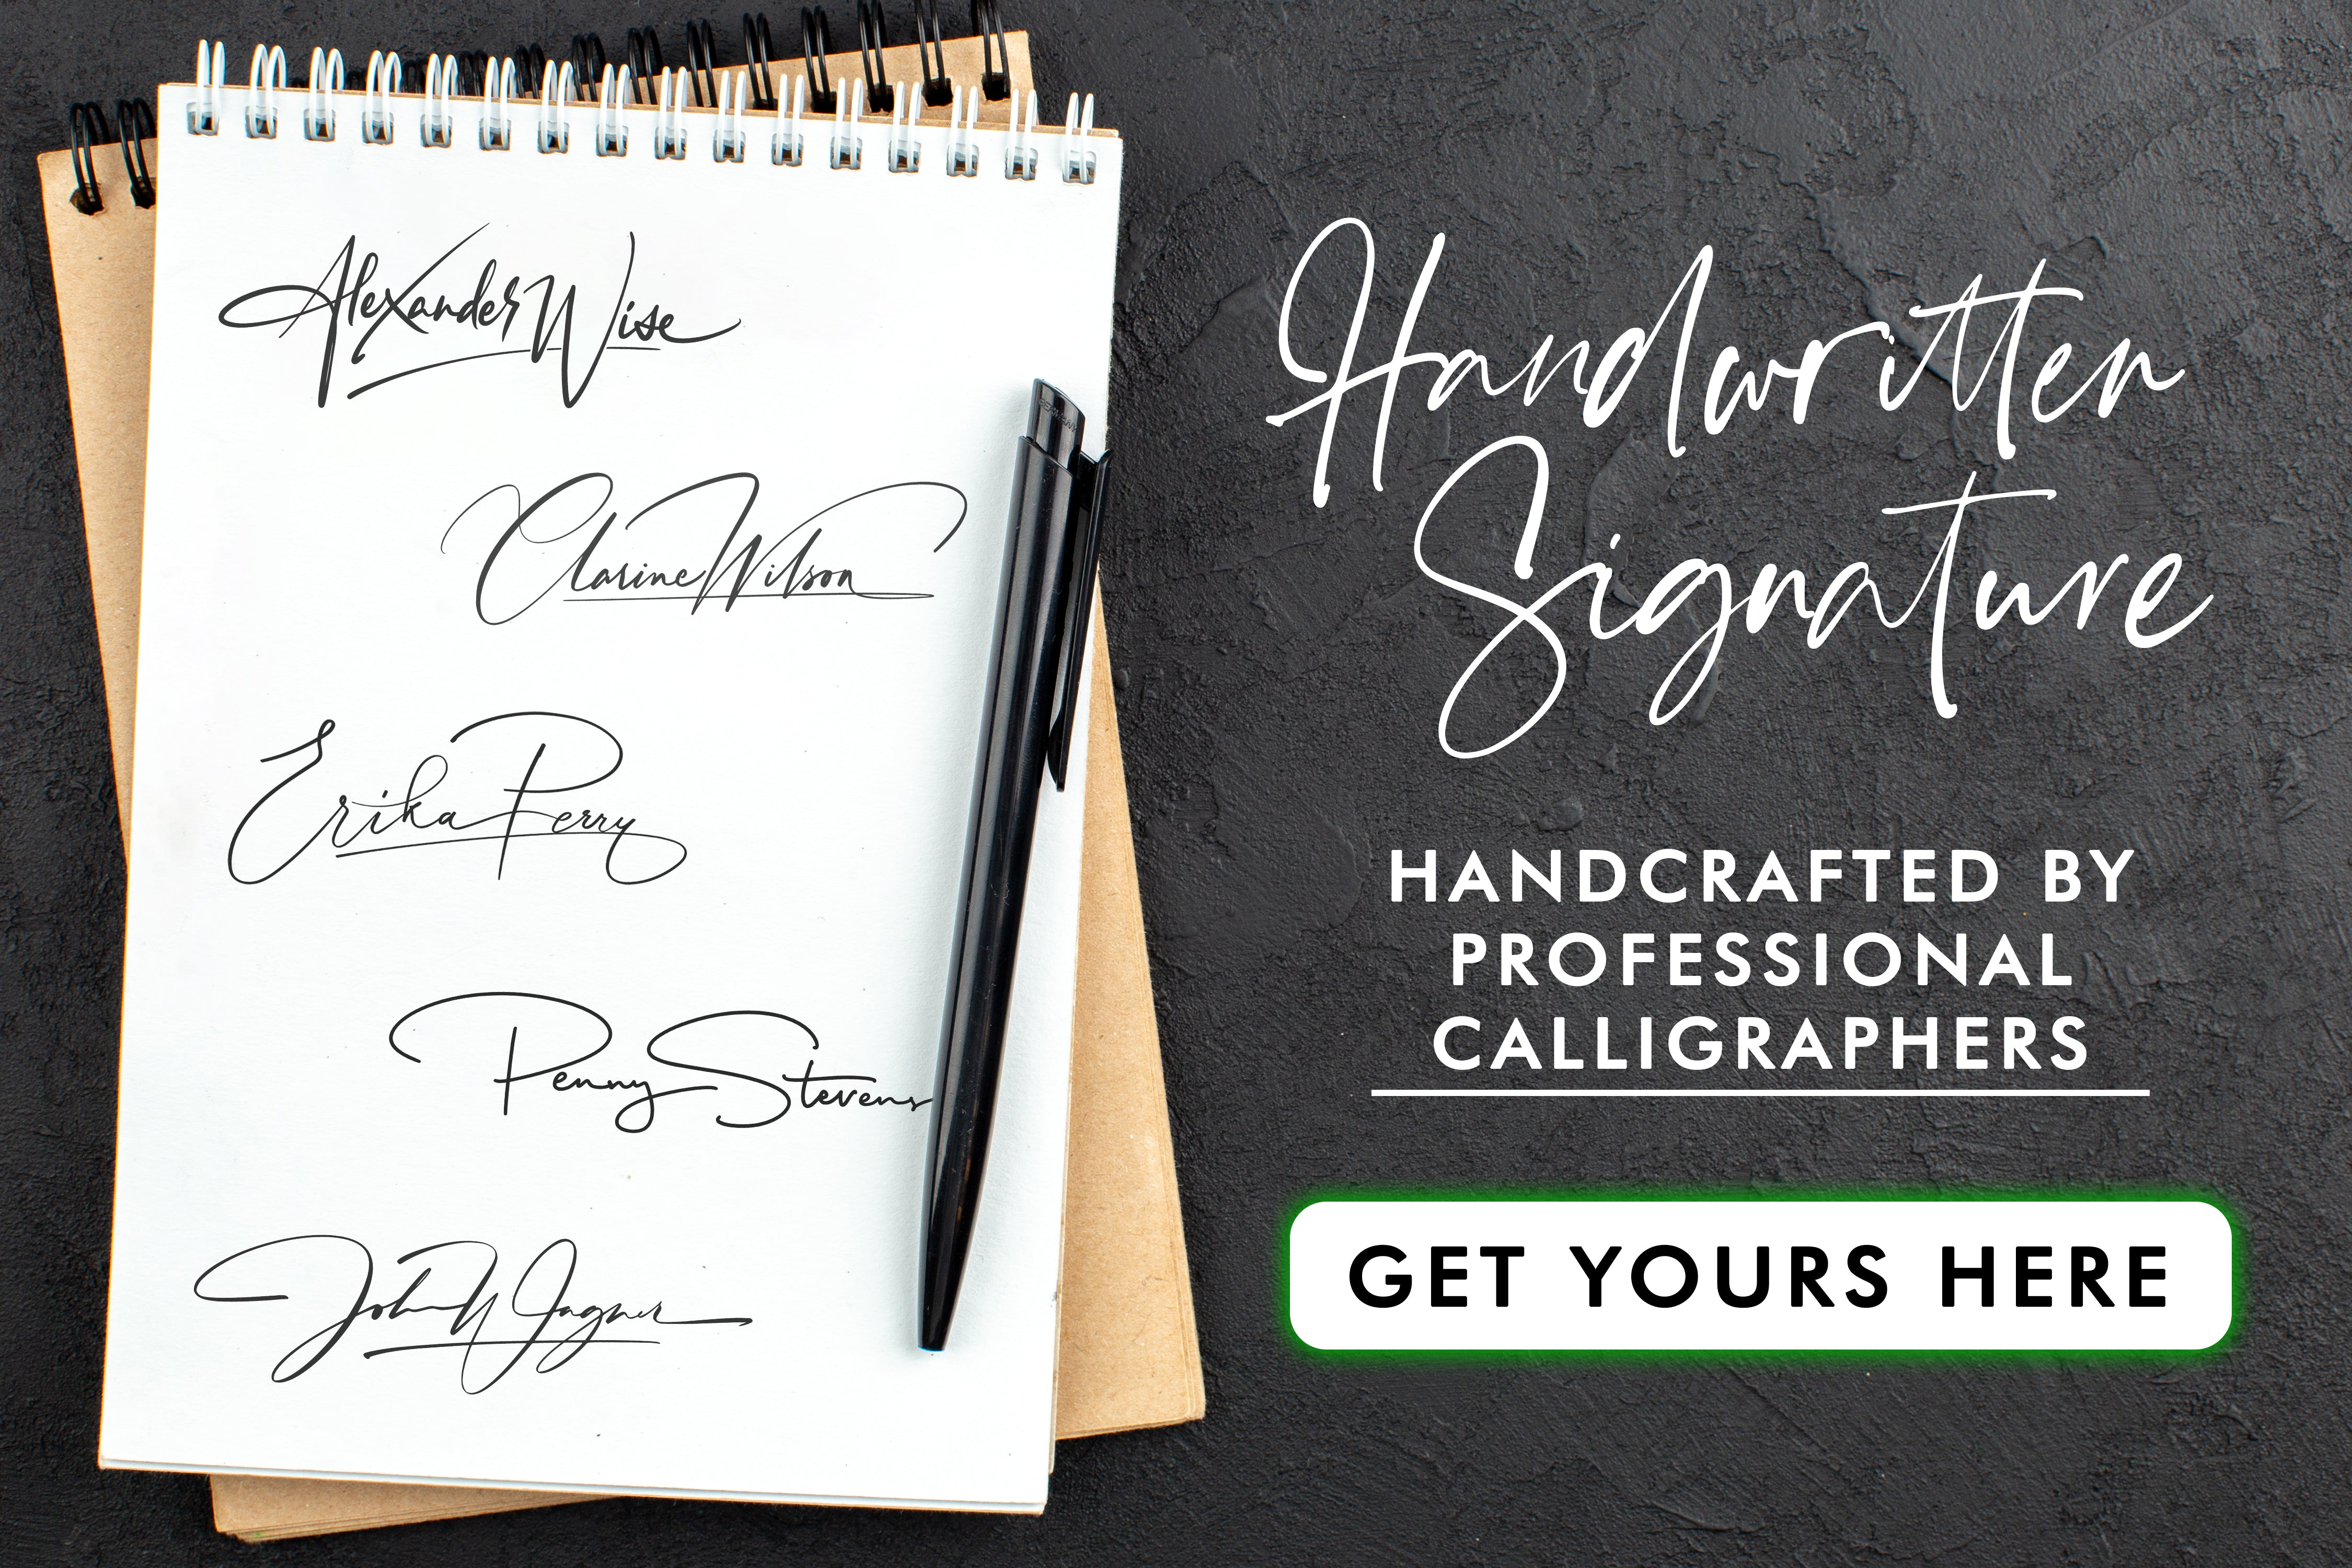 Unlock the secrets of successful autograph collecting. From sourcing to preserving, this comprehensive guide has everything a beginner needs.